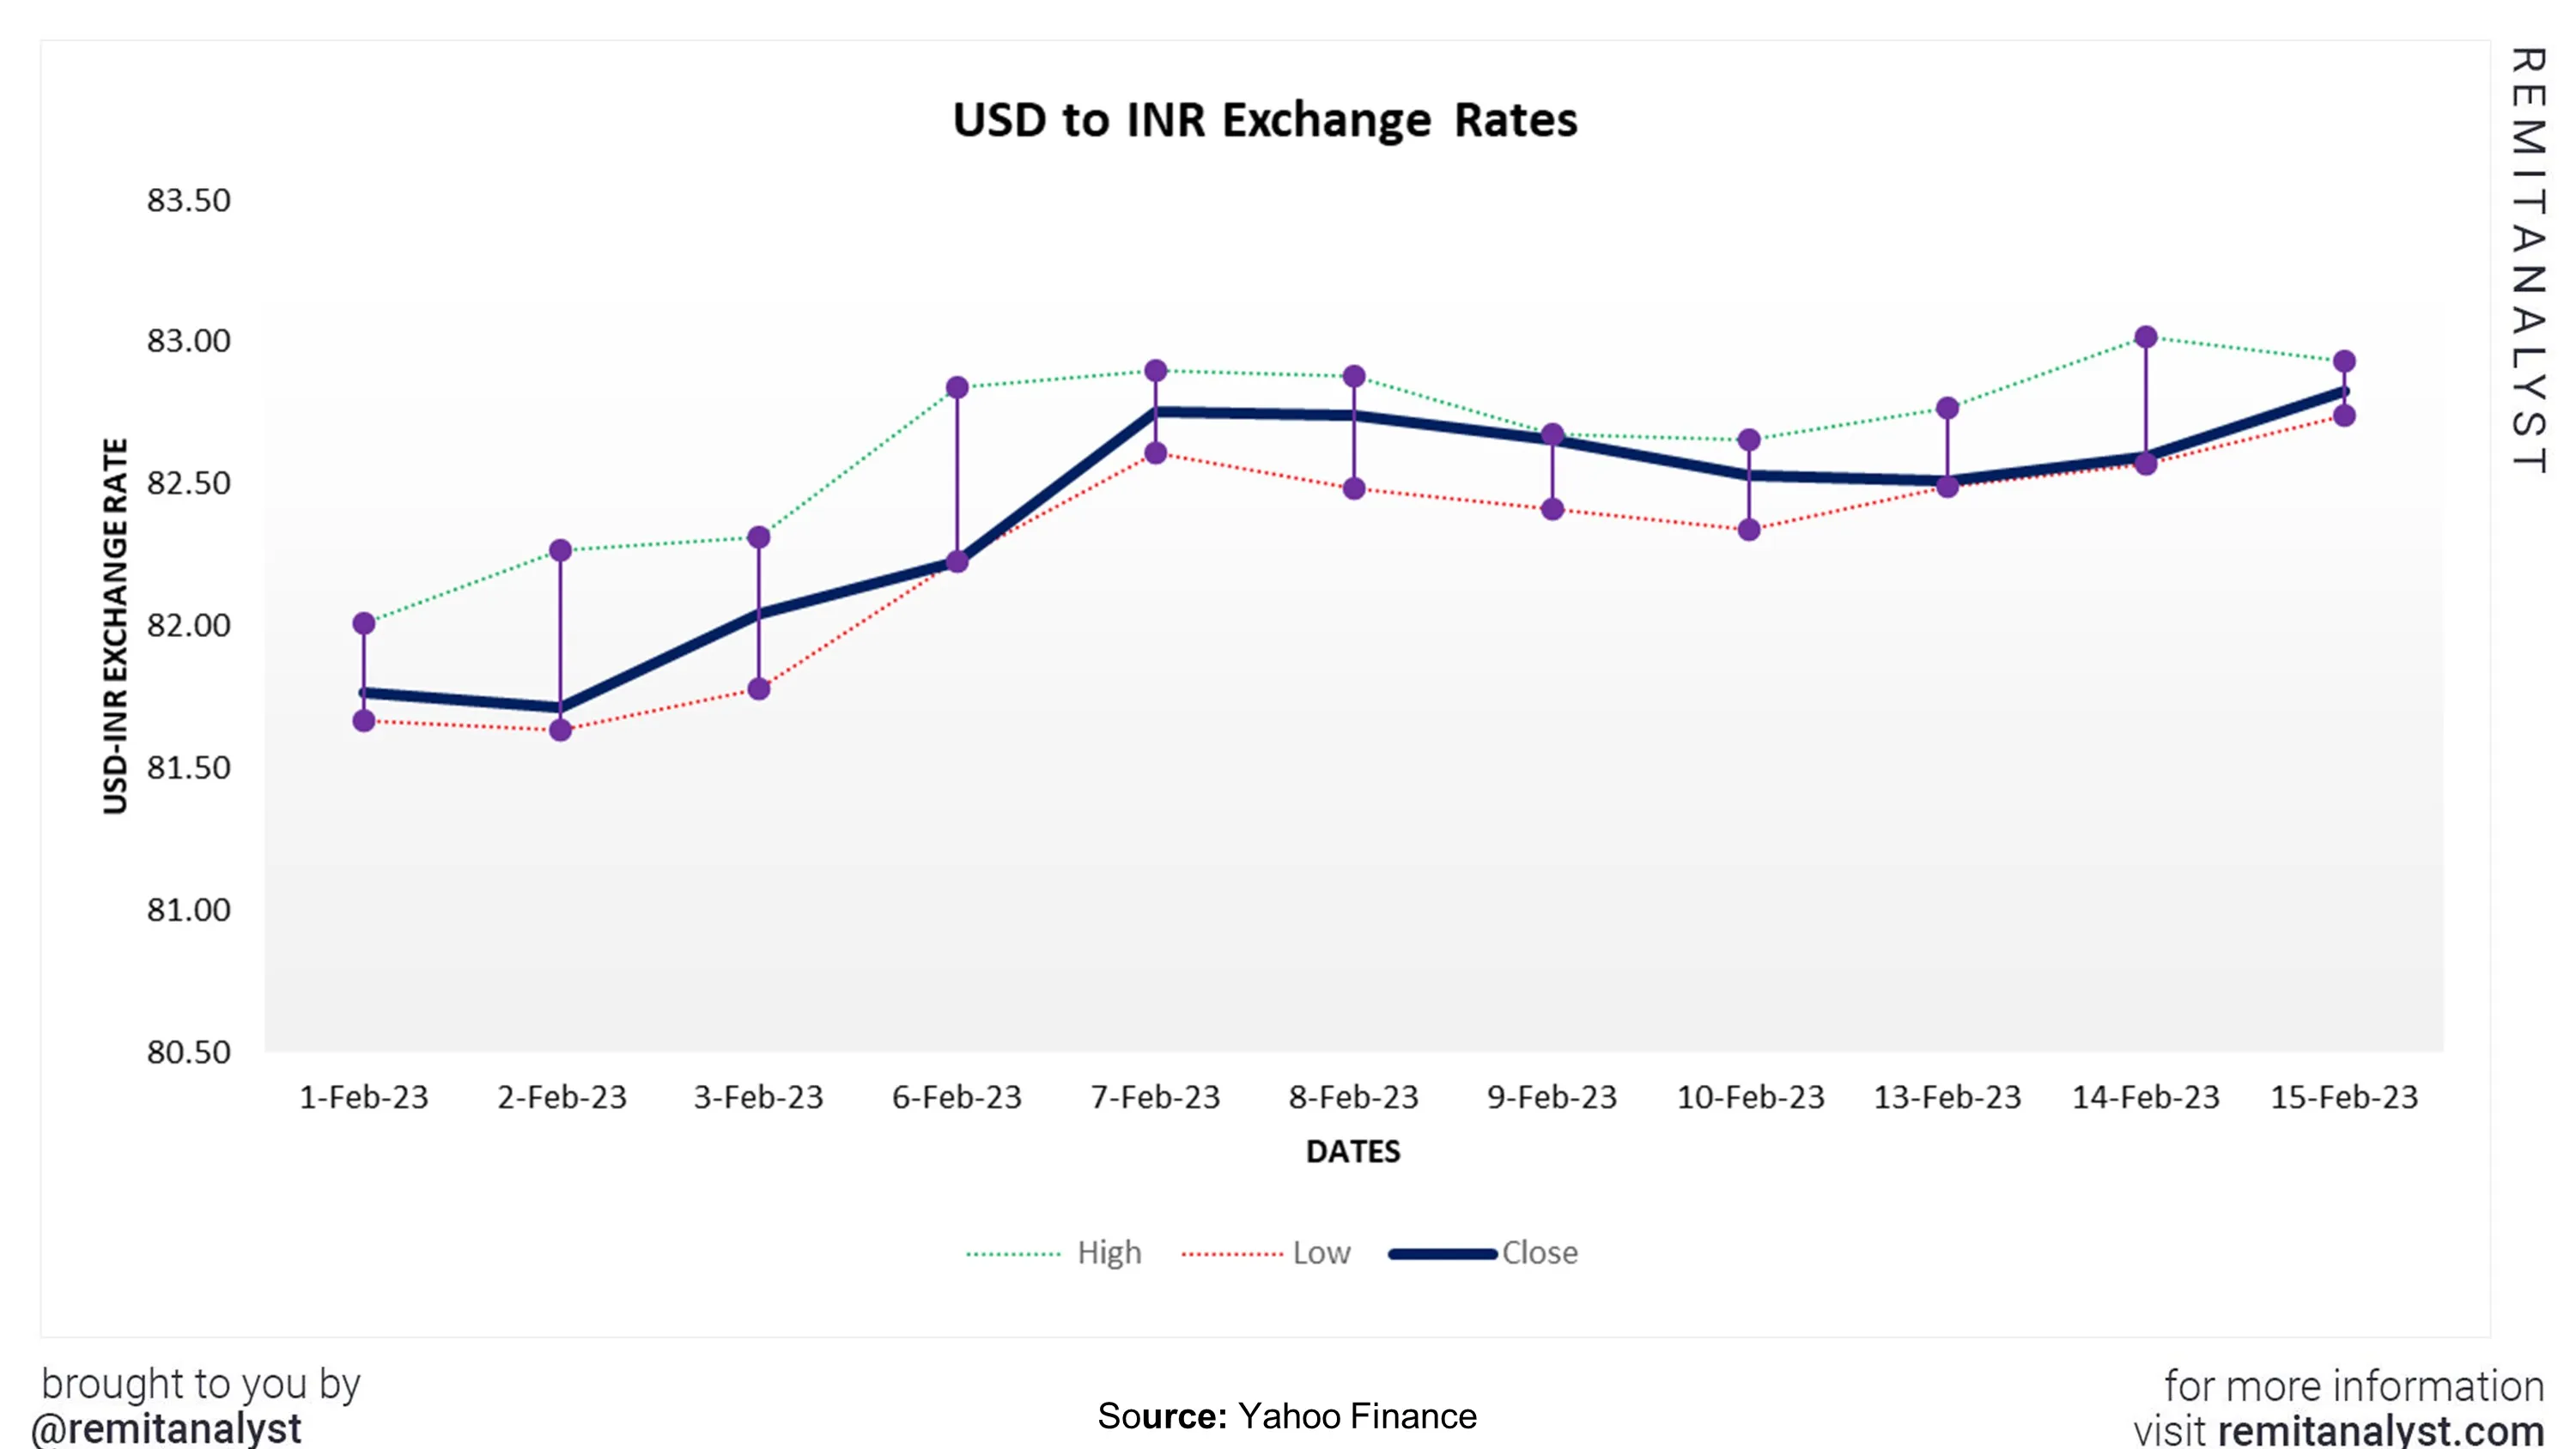 usd-to-inr-exchange-rate-from-1-feb-2023-to-15-feb-2023